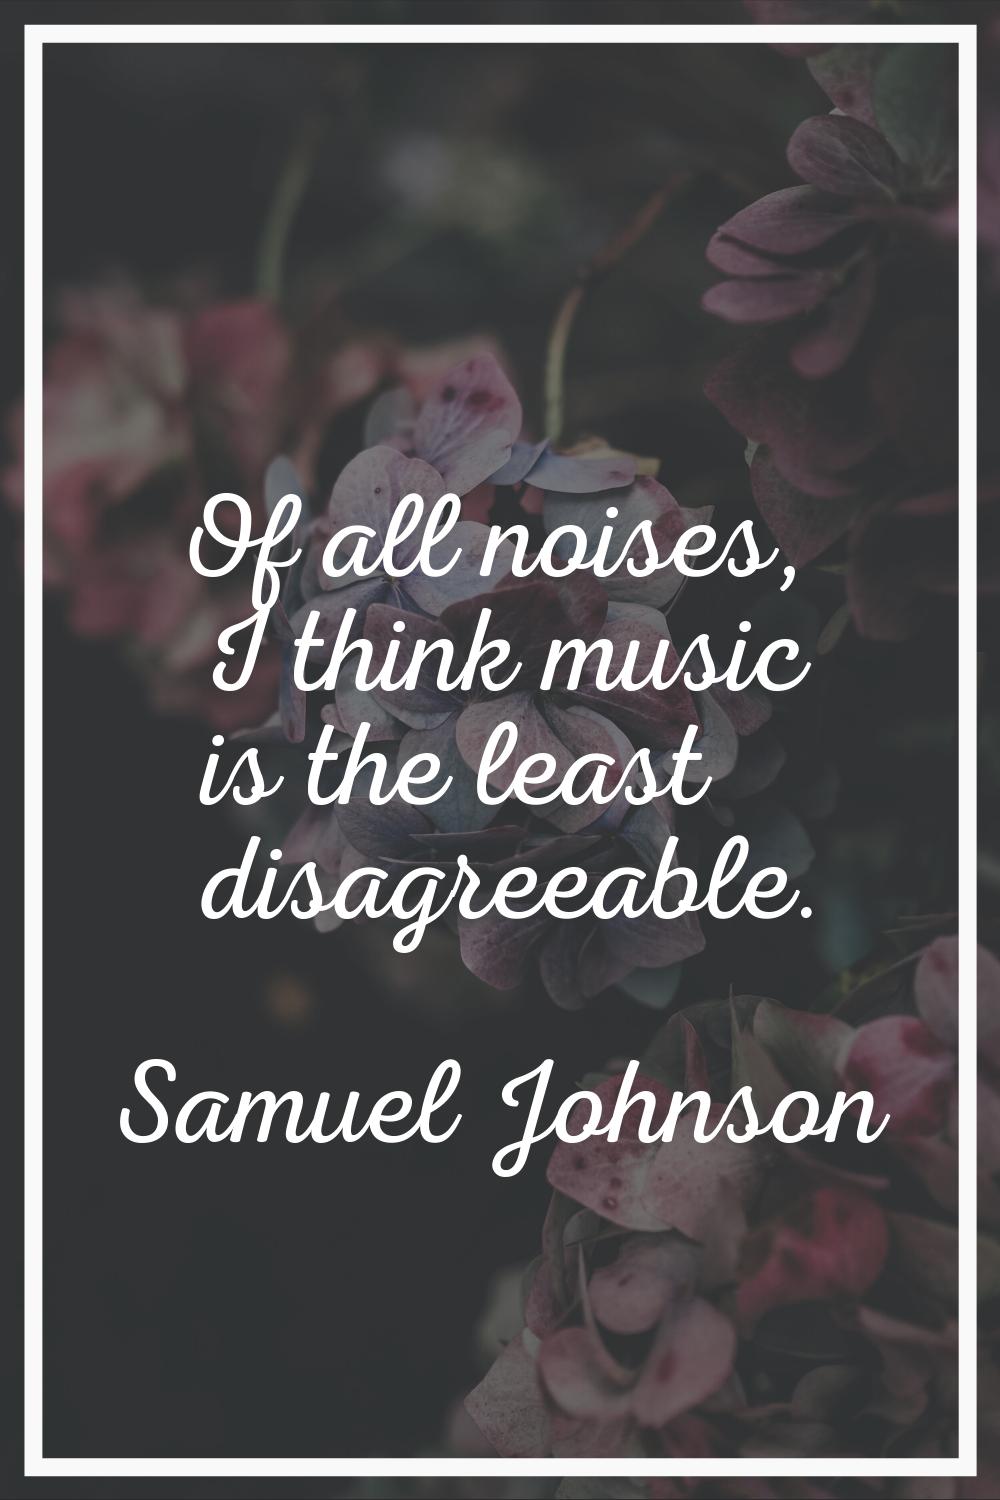 Of all noises, I think music is the least disagreeable.